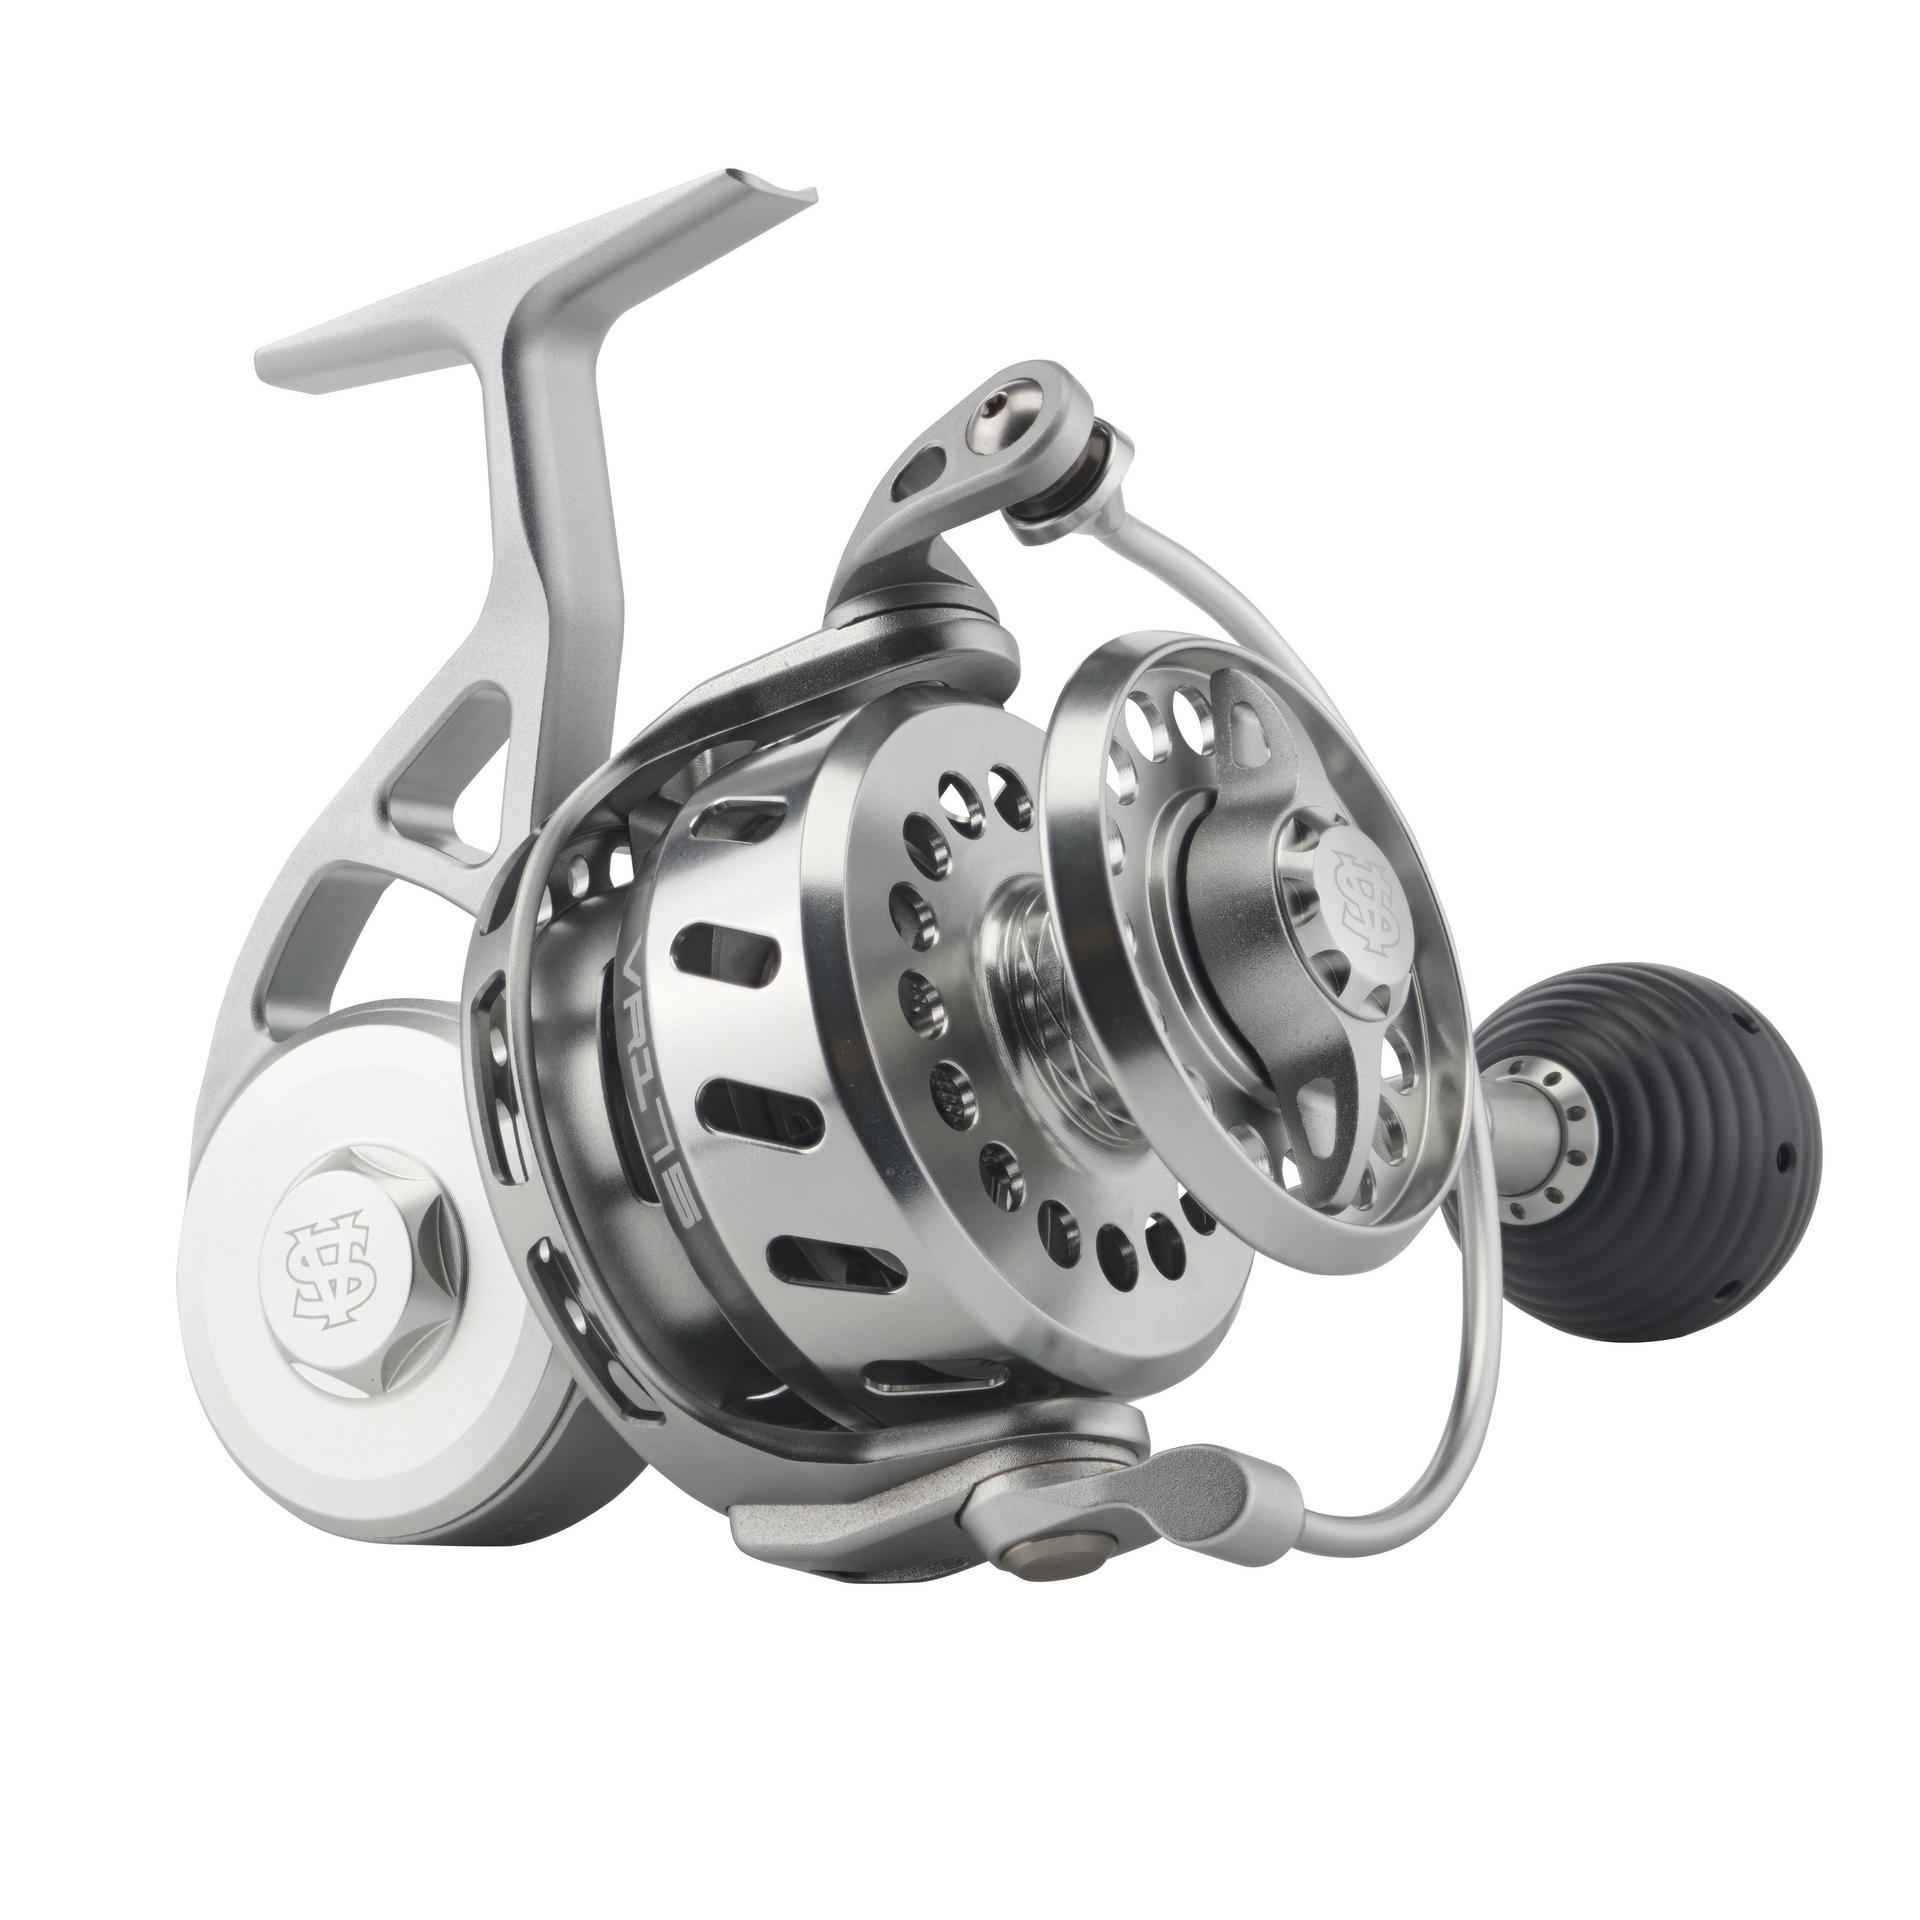 VAN STAAL X Series Bail-Less Spinning, right hand, Spinning Fishing Reel,  Front Drag 150 / Silver